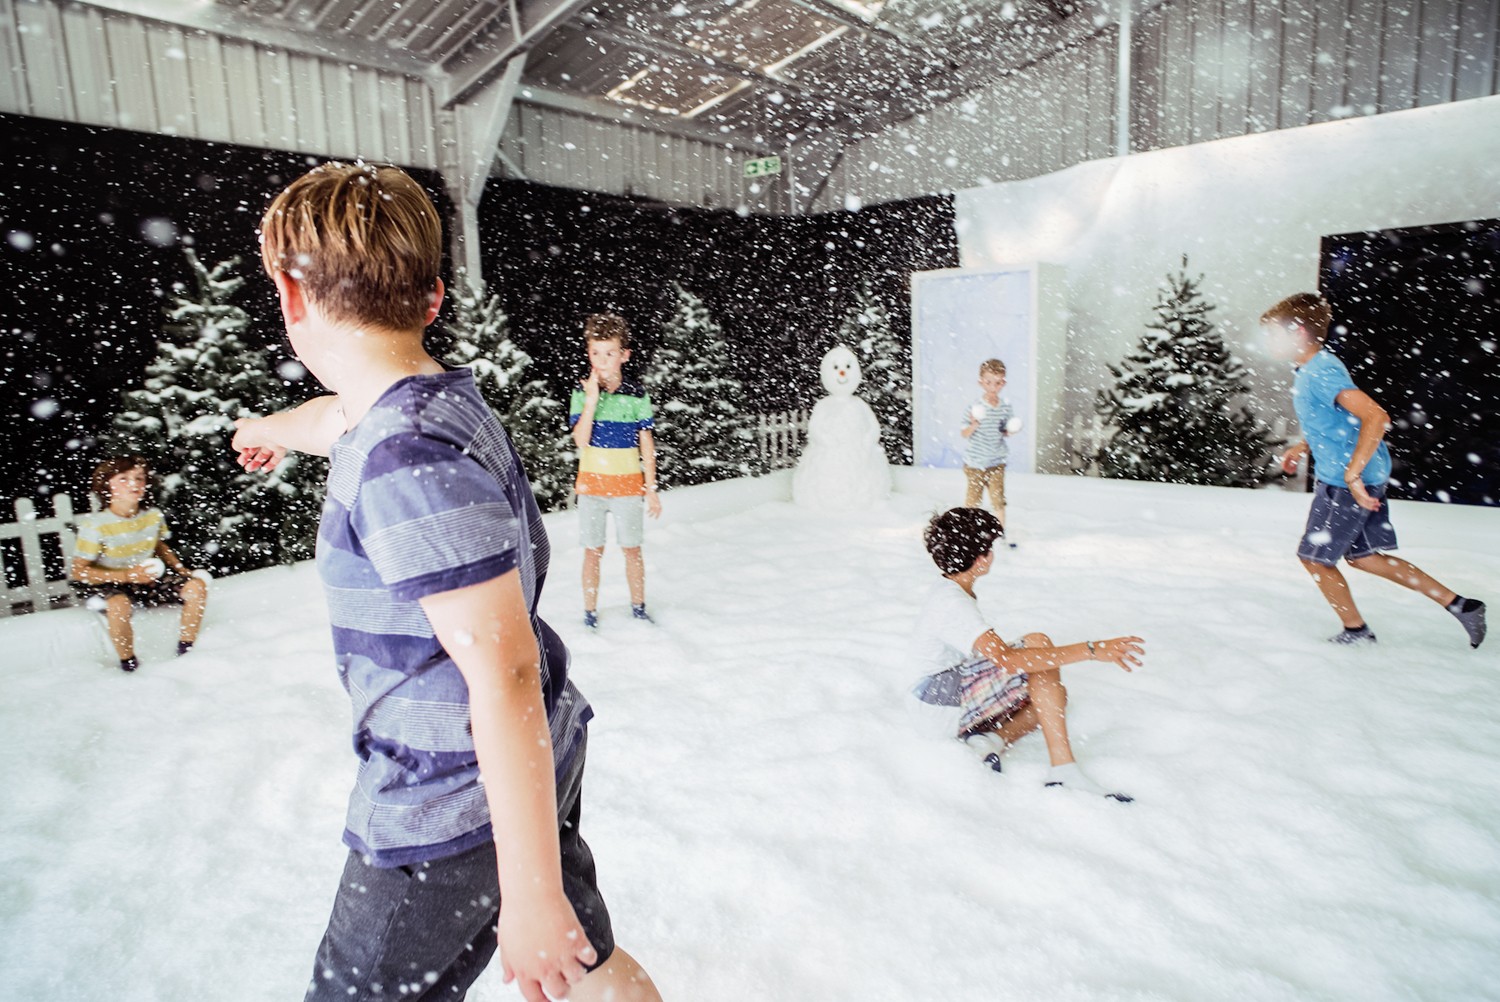 Snow Play Zone Hire, Eco Friendly Safe Artificial Snow, Falling Snow Machine Hire UK, Indoor Snow Play Zone UK, FX Live